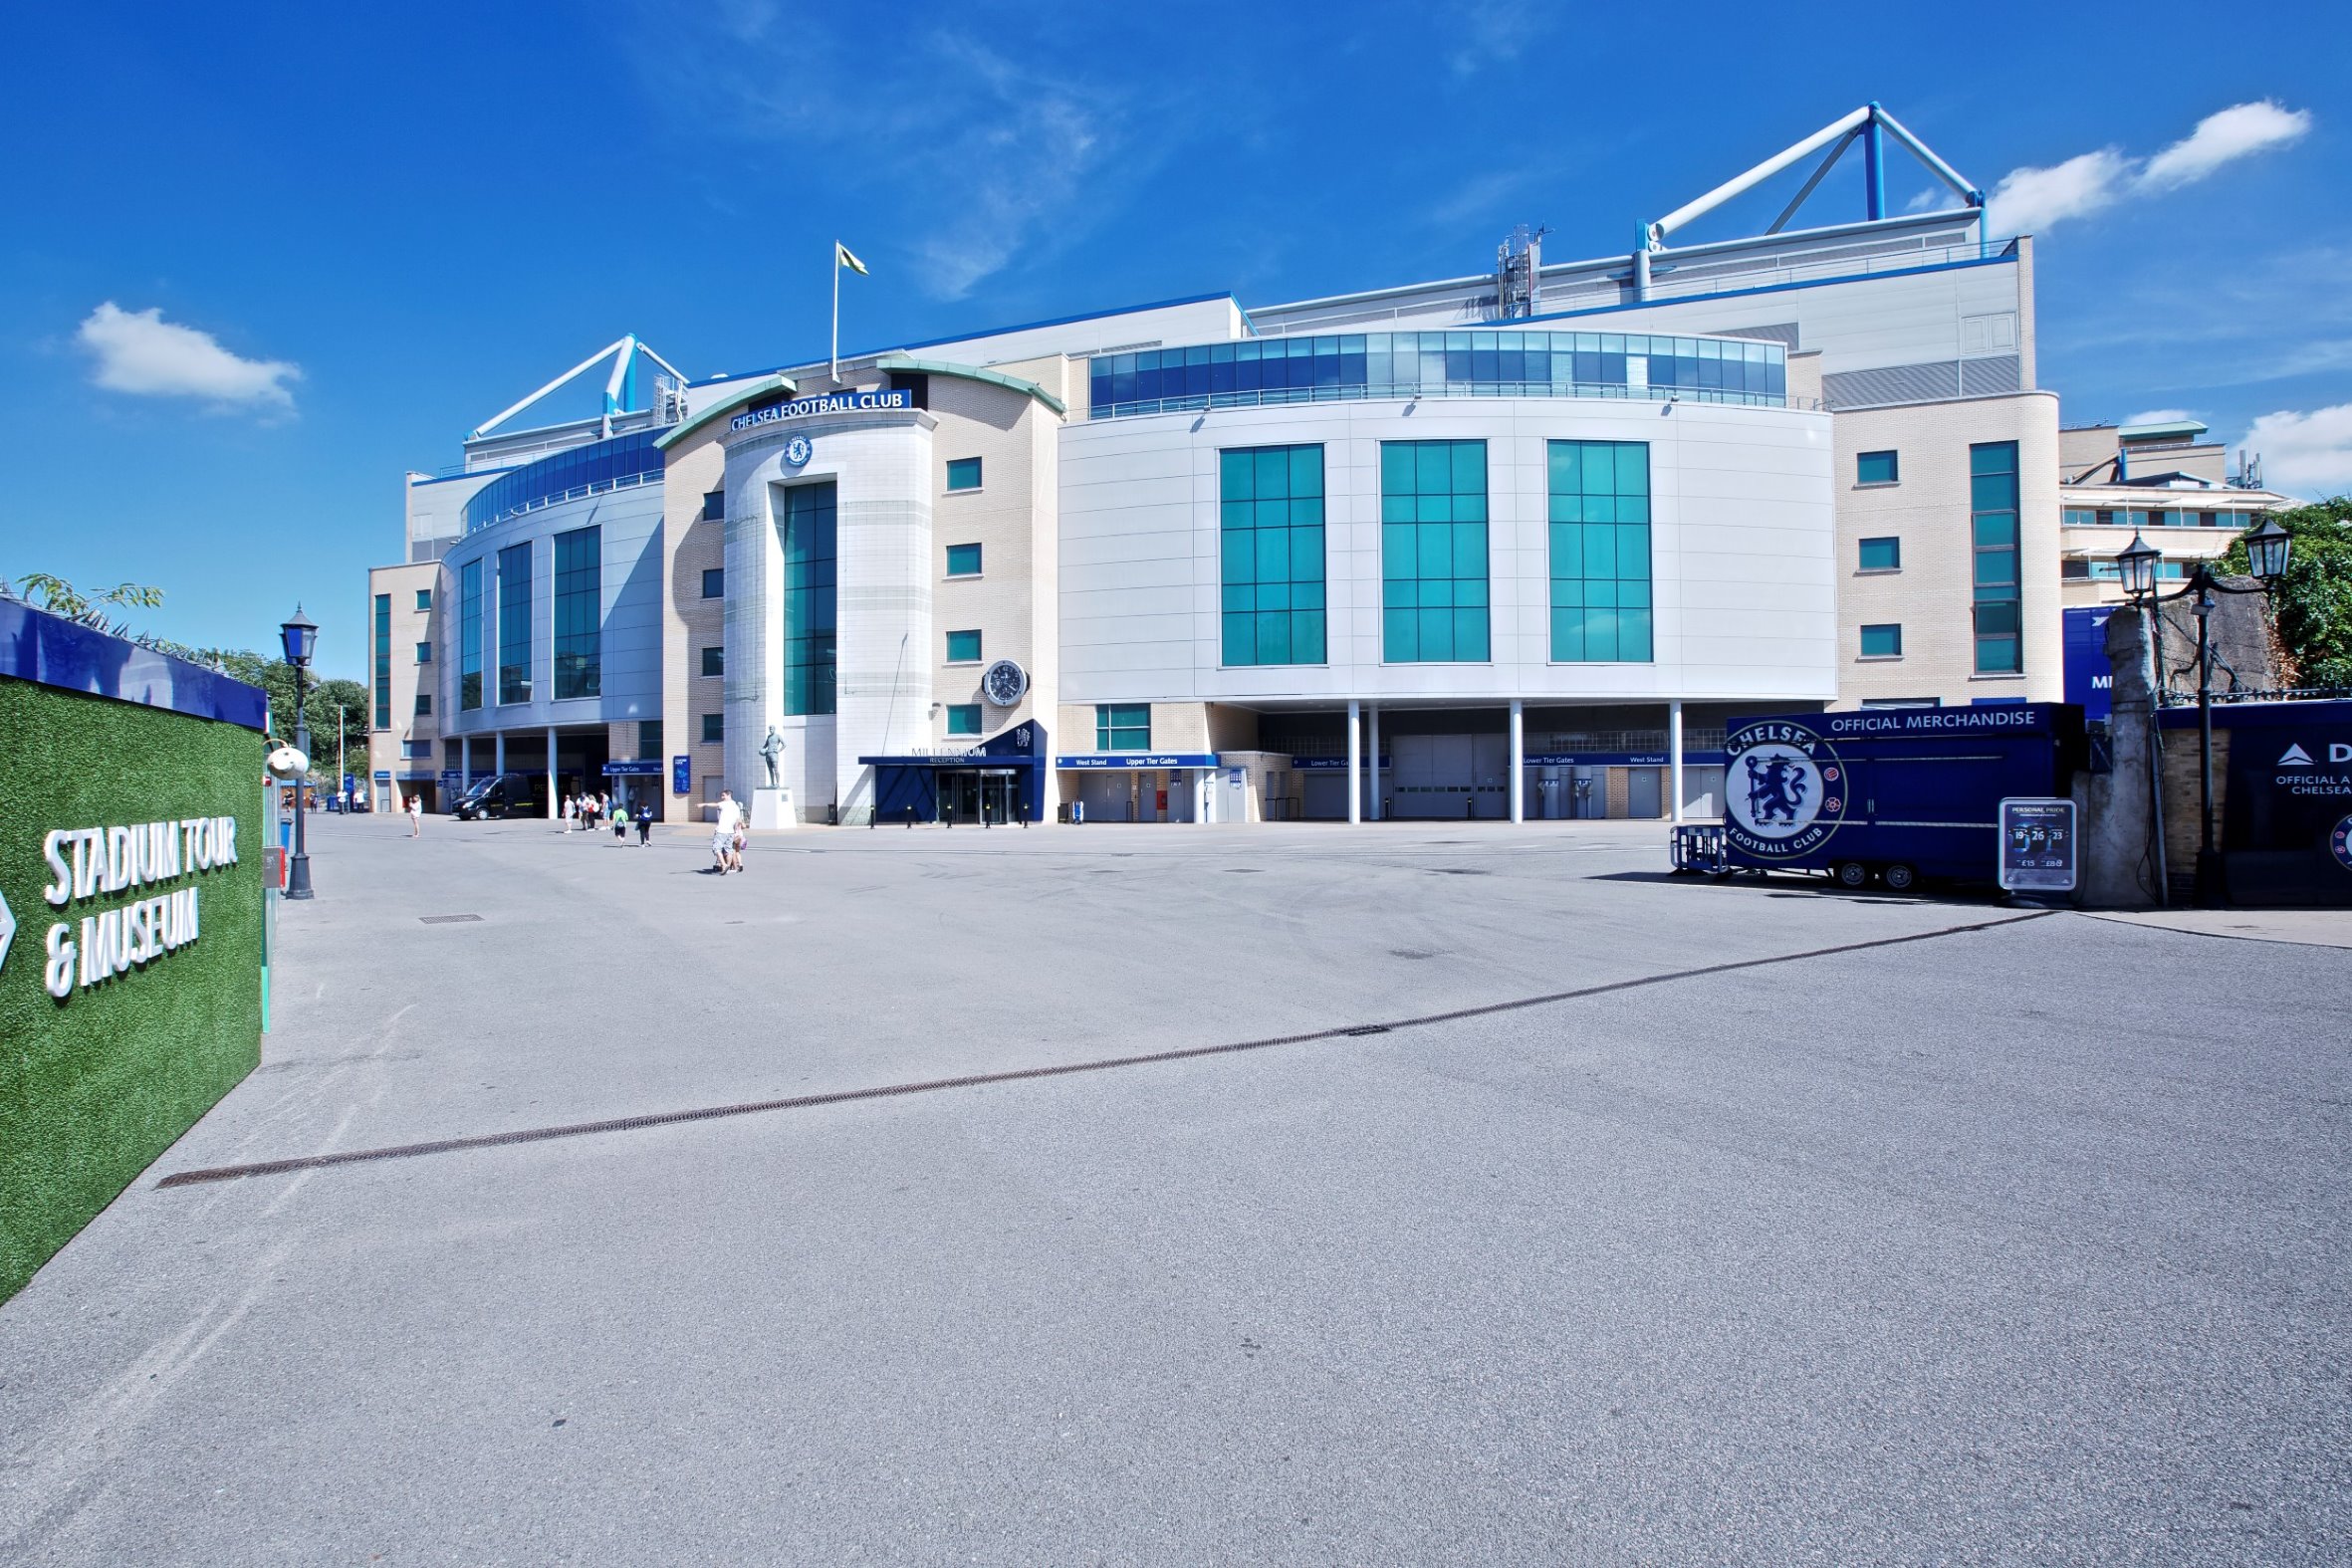 Location Meetings Events At Chelsea Football Club